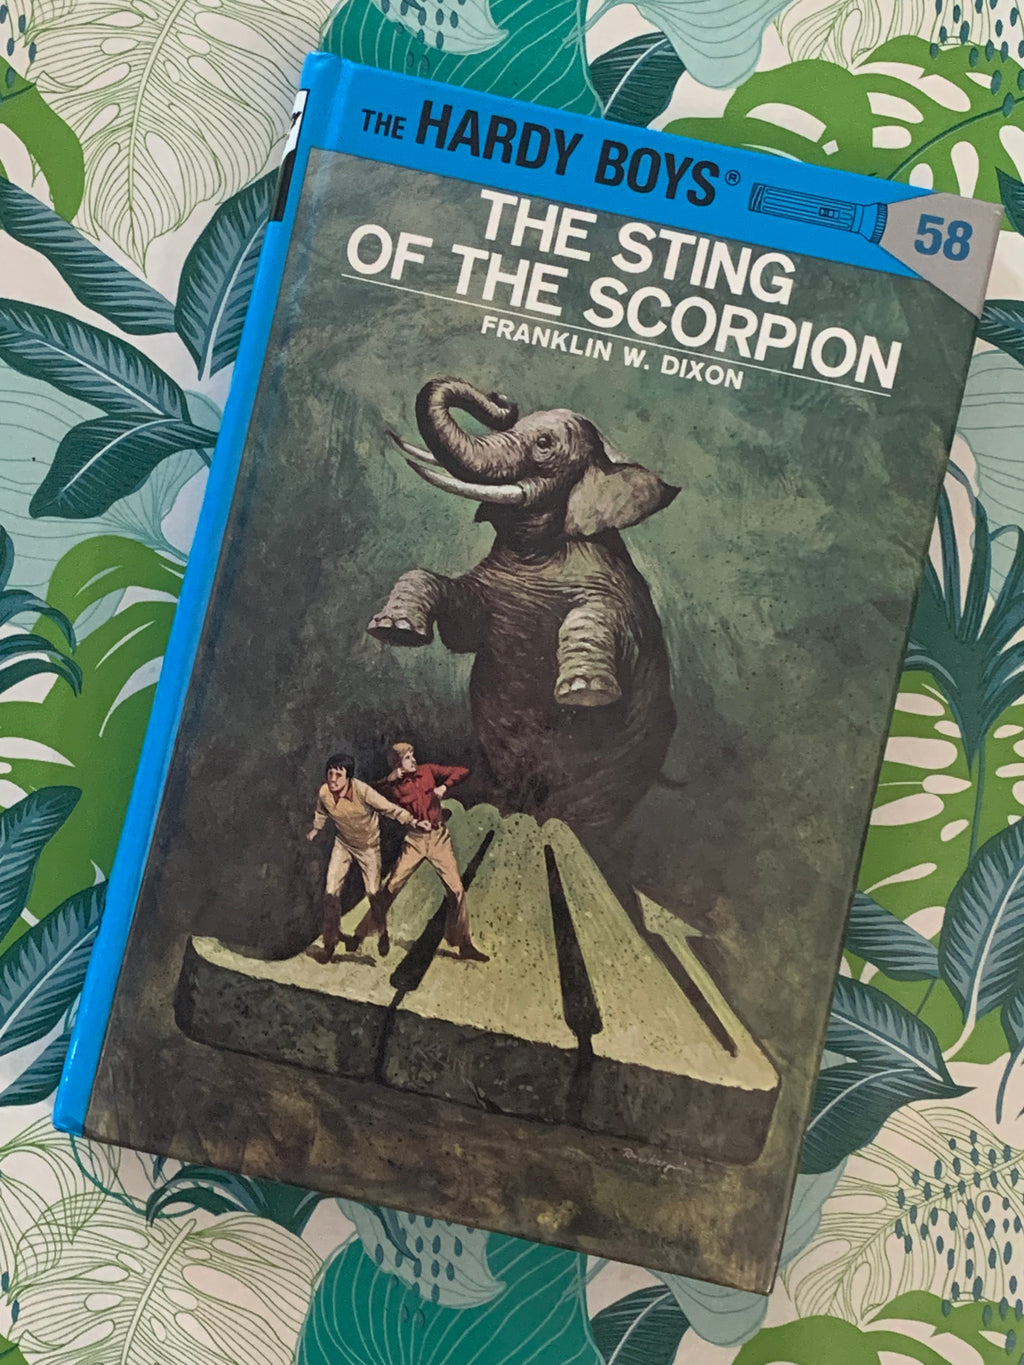 The Hardy Boys #58: The Sting of the Scorpion- By Franklin W. Dixon